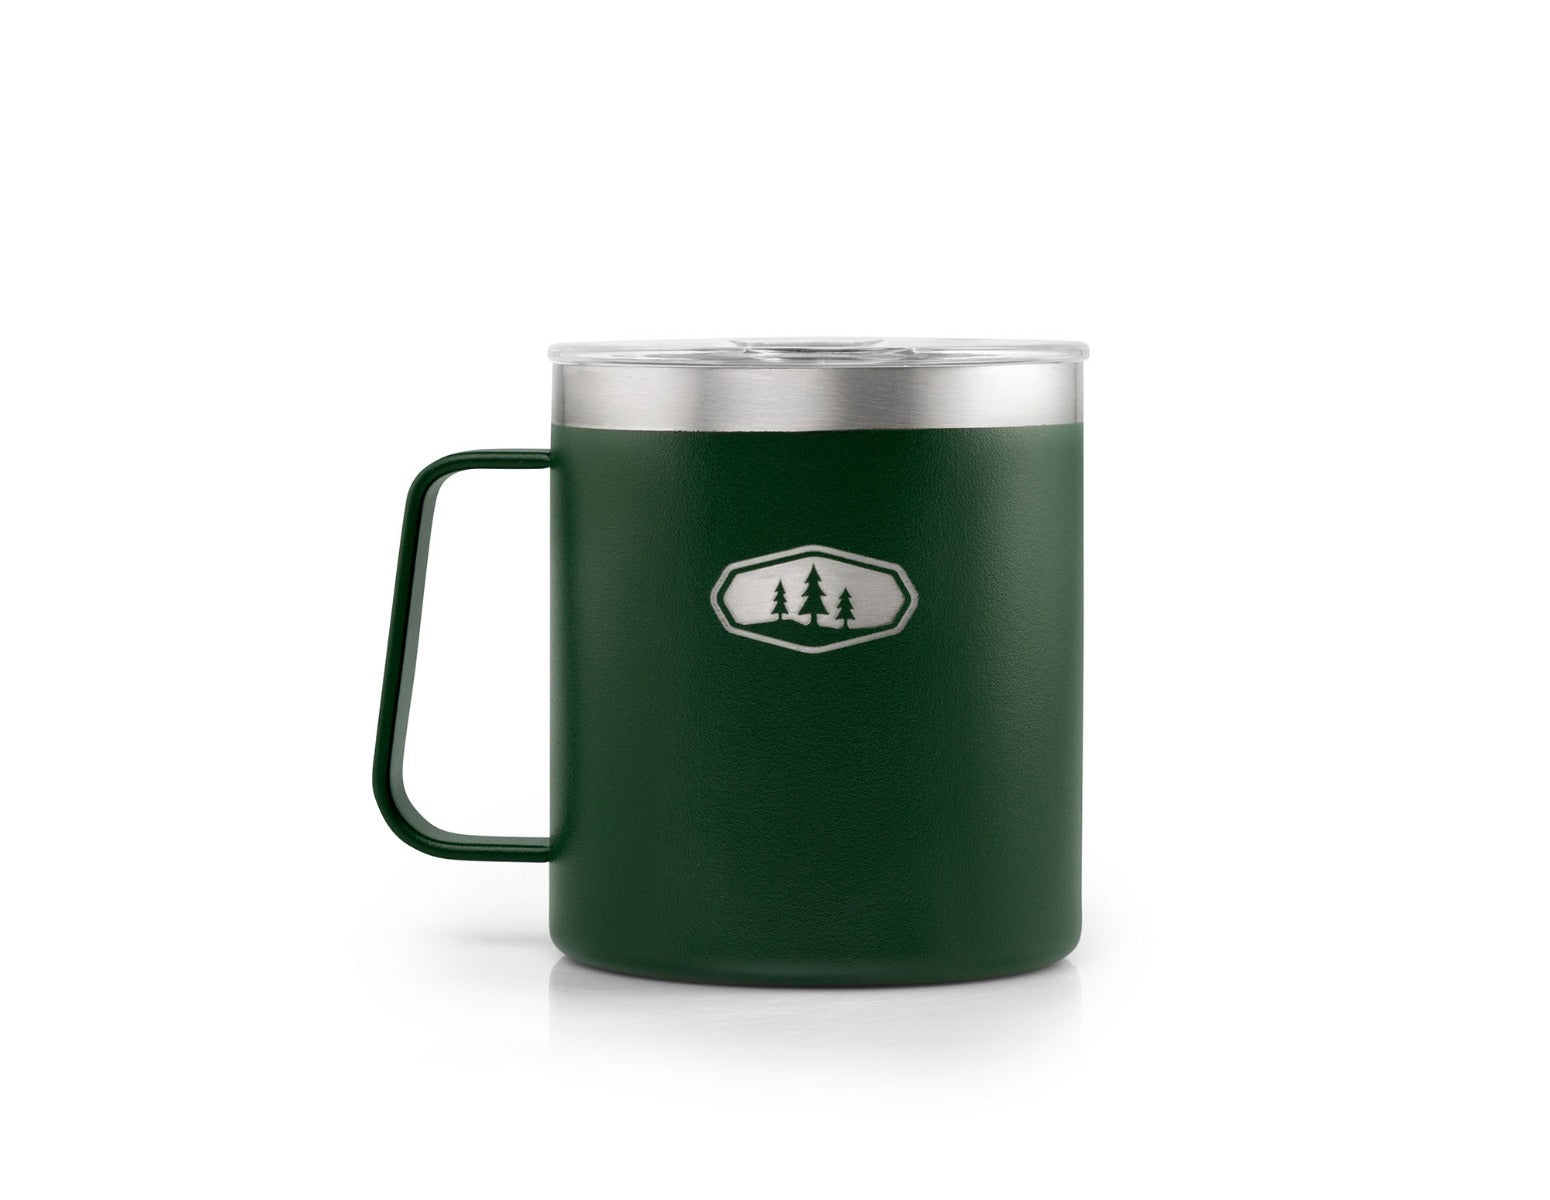 Glacier Stainless Insulated Camp Cup, 15 fl oz